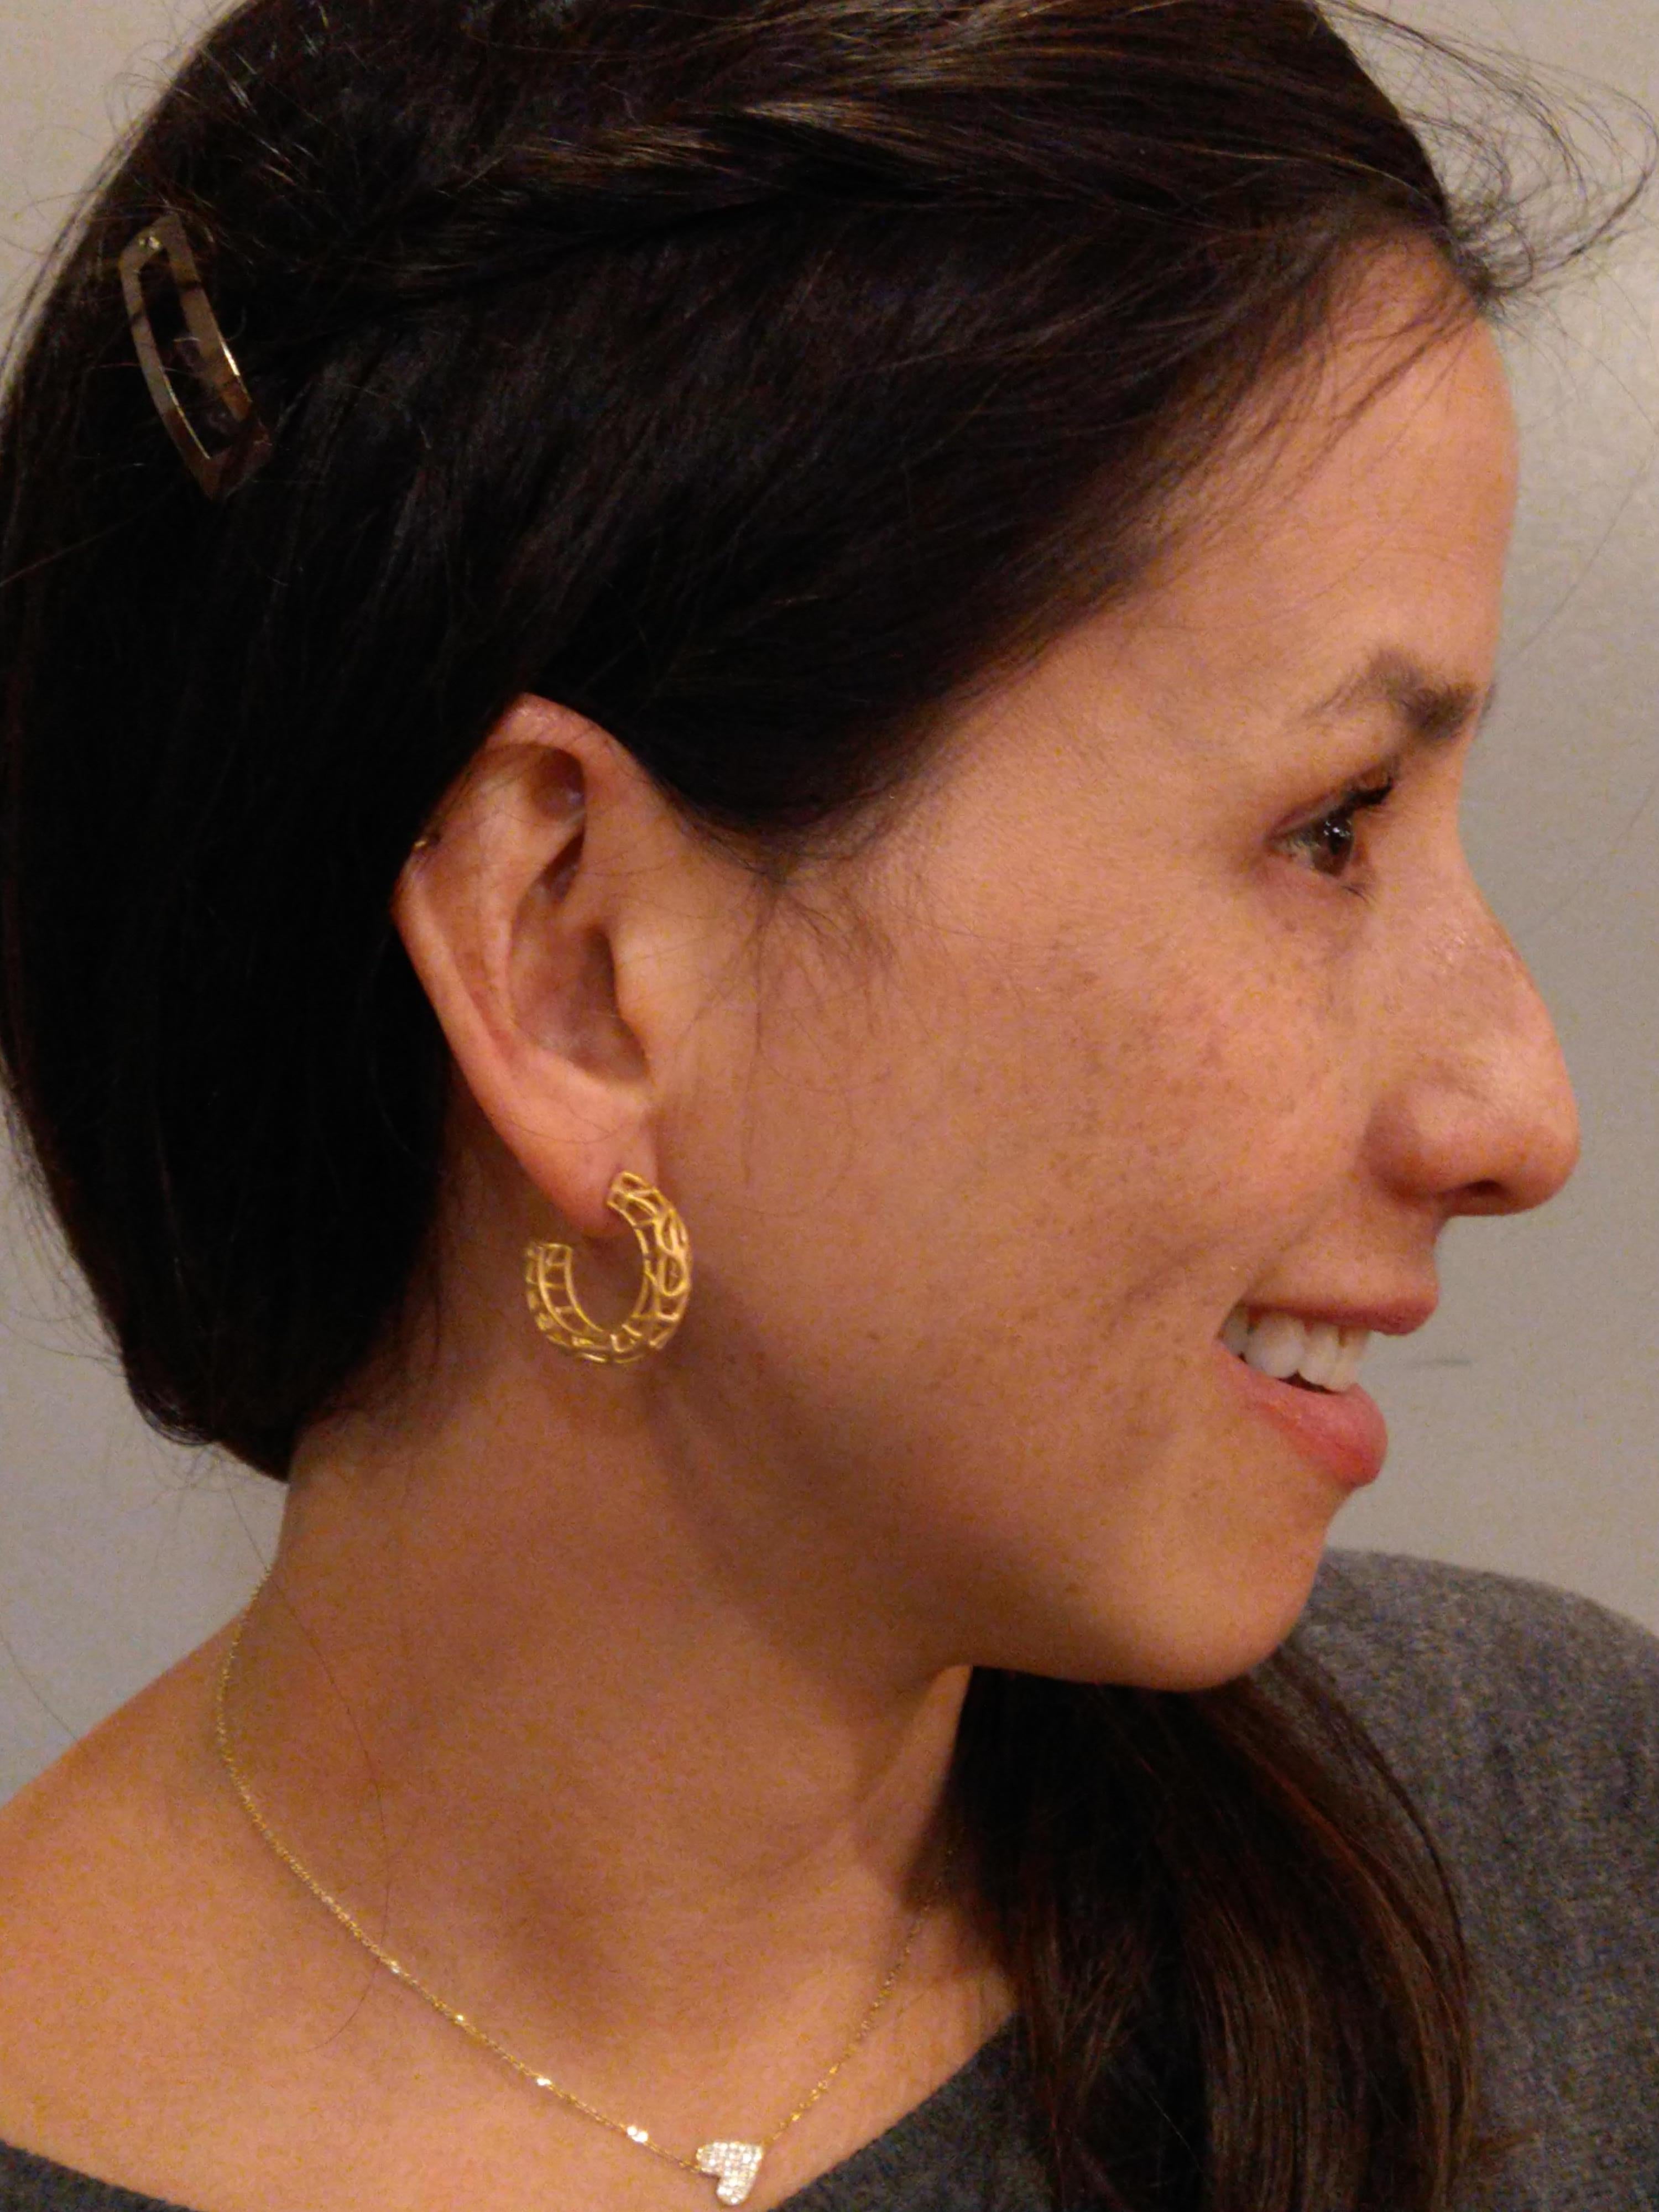 18 Karat Yellow Gold Vermeil Seaweed Hoop Earrings, My favorite place on earth , the ocean. The inspiration here is endless, the ocean changes everyday with it's tides and waves. Plenty of salt and sun. These earring are vermeil which is 18 karat